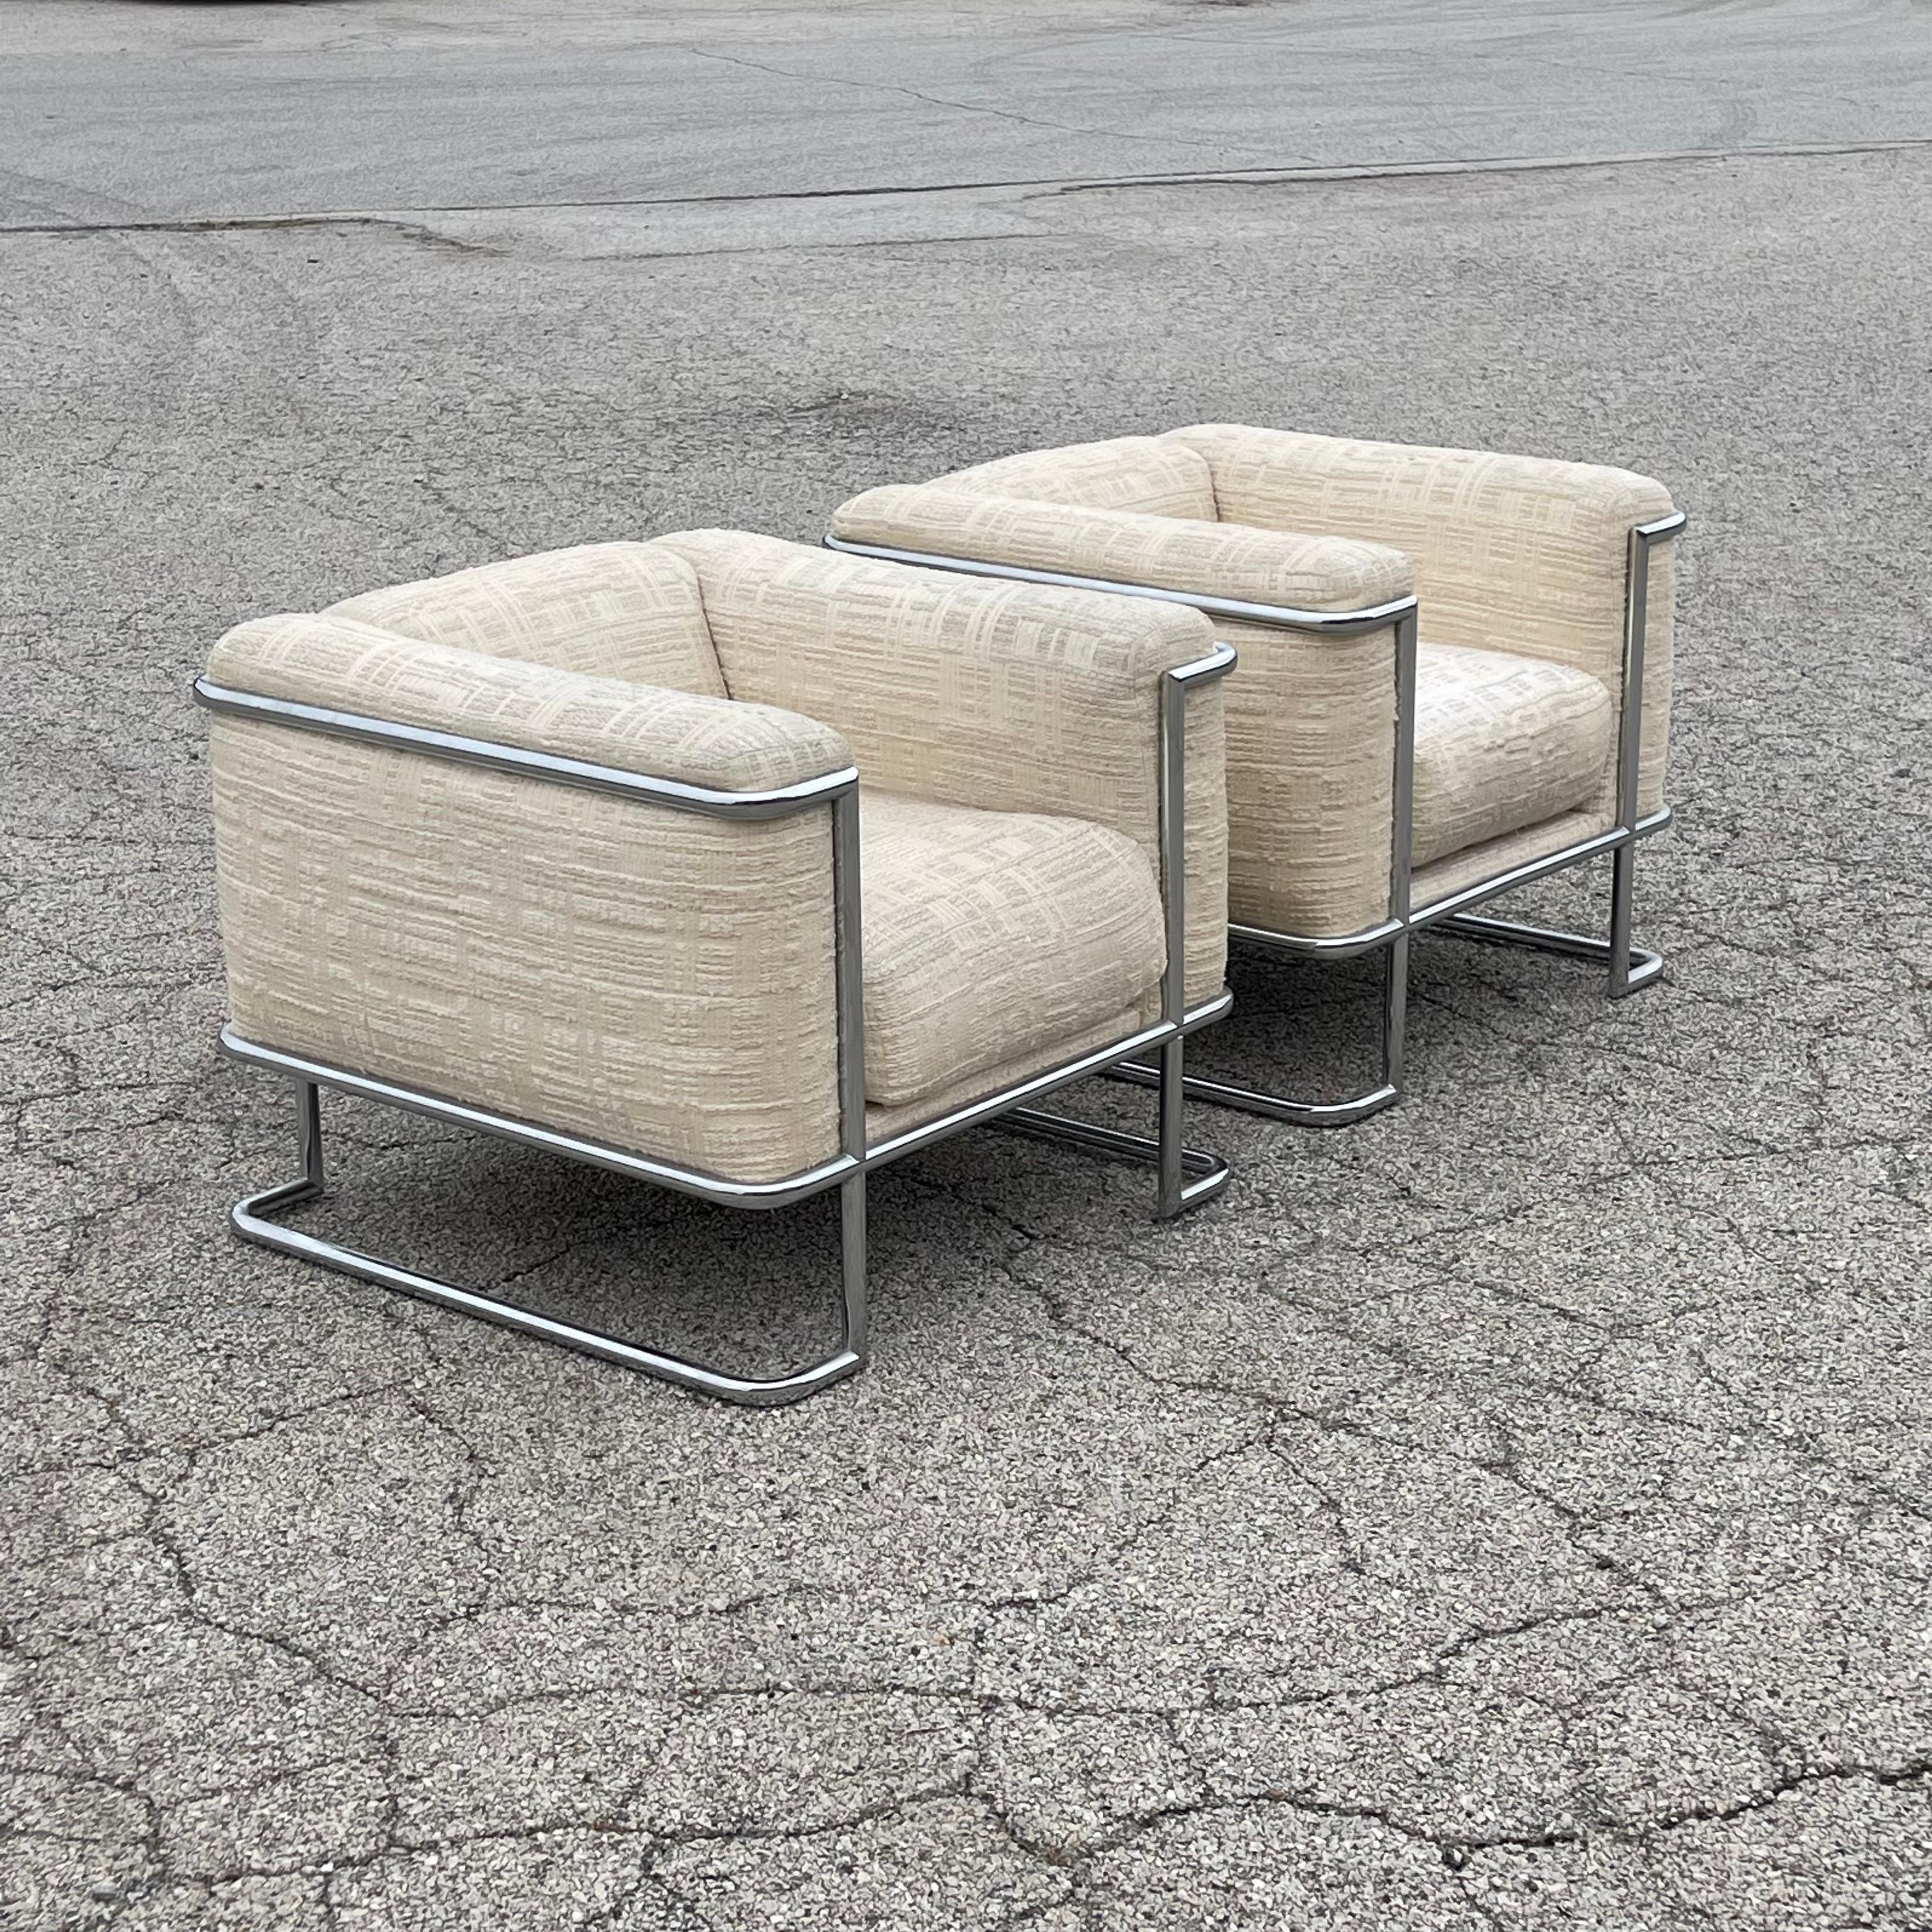 Late 20th Century John Mascheroni Pair of Lounge Chairs by Swaim Originals For Sale